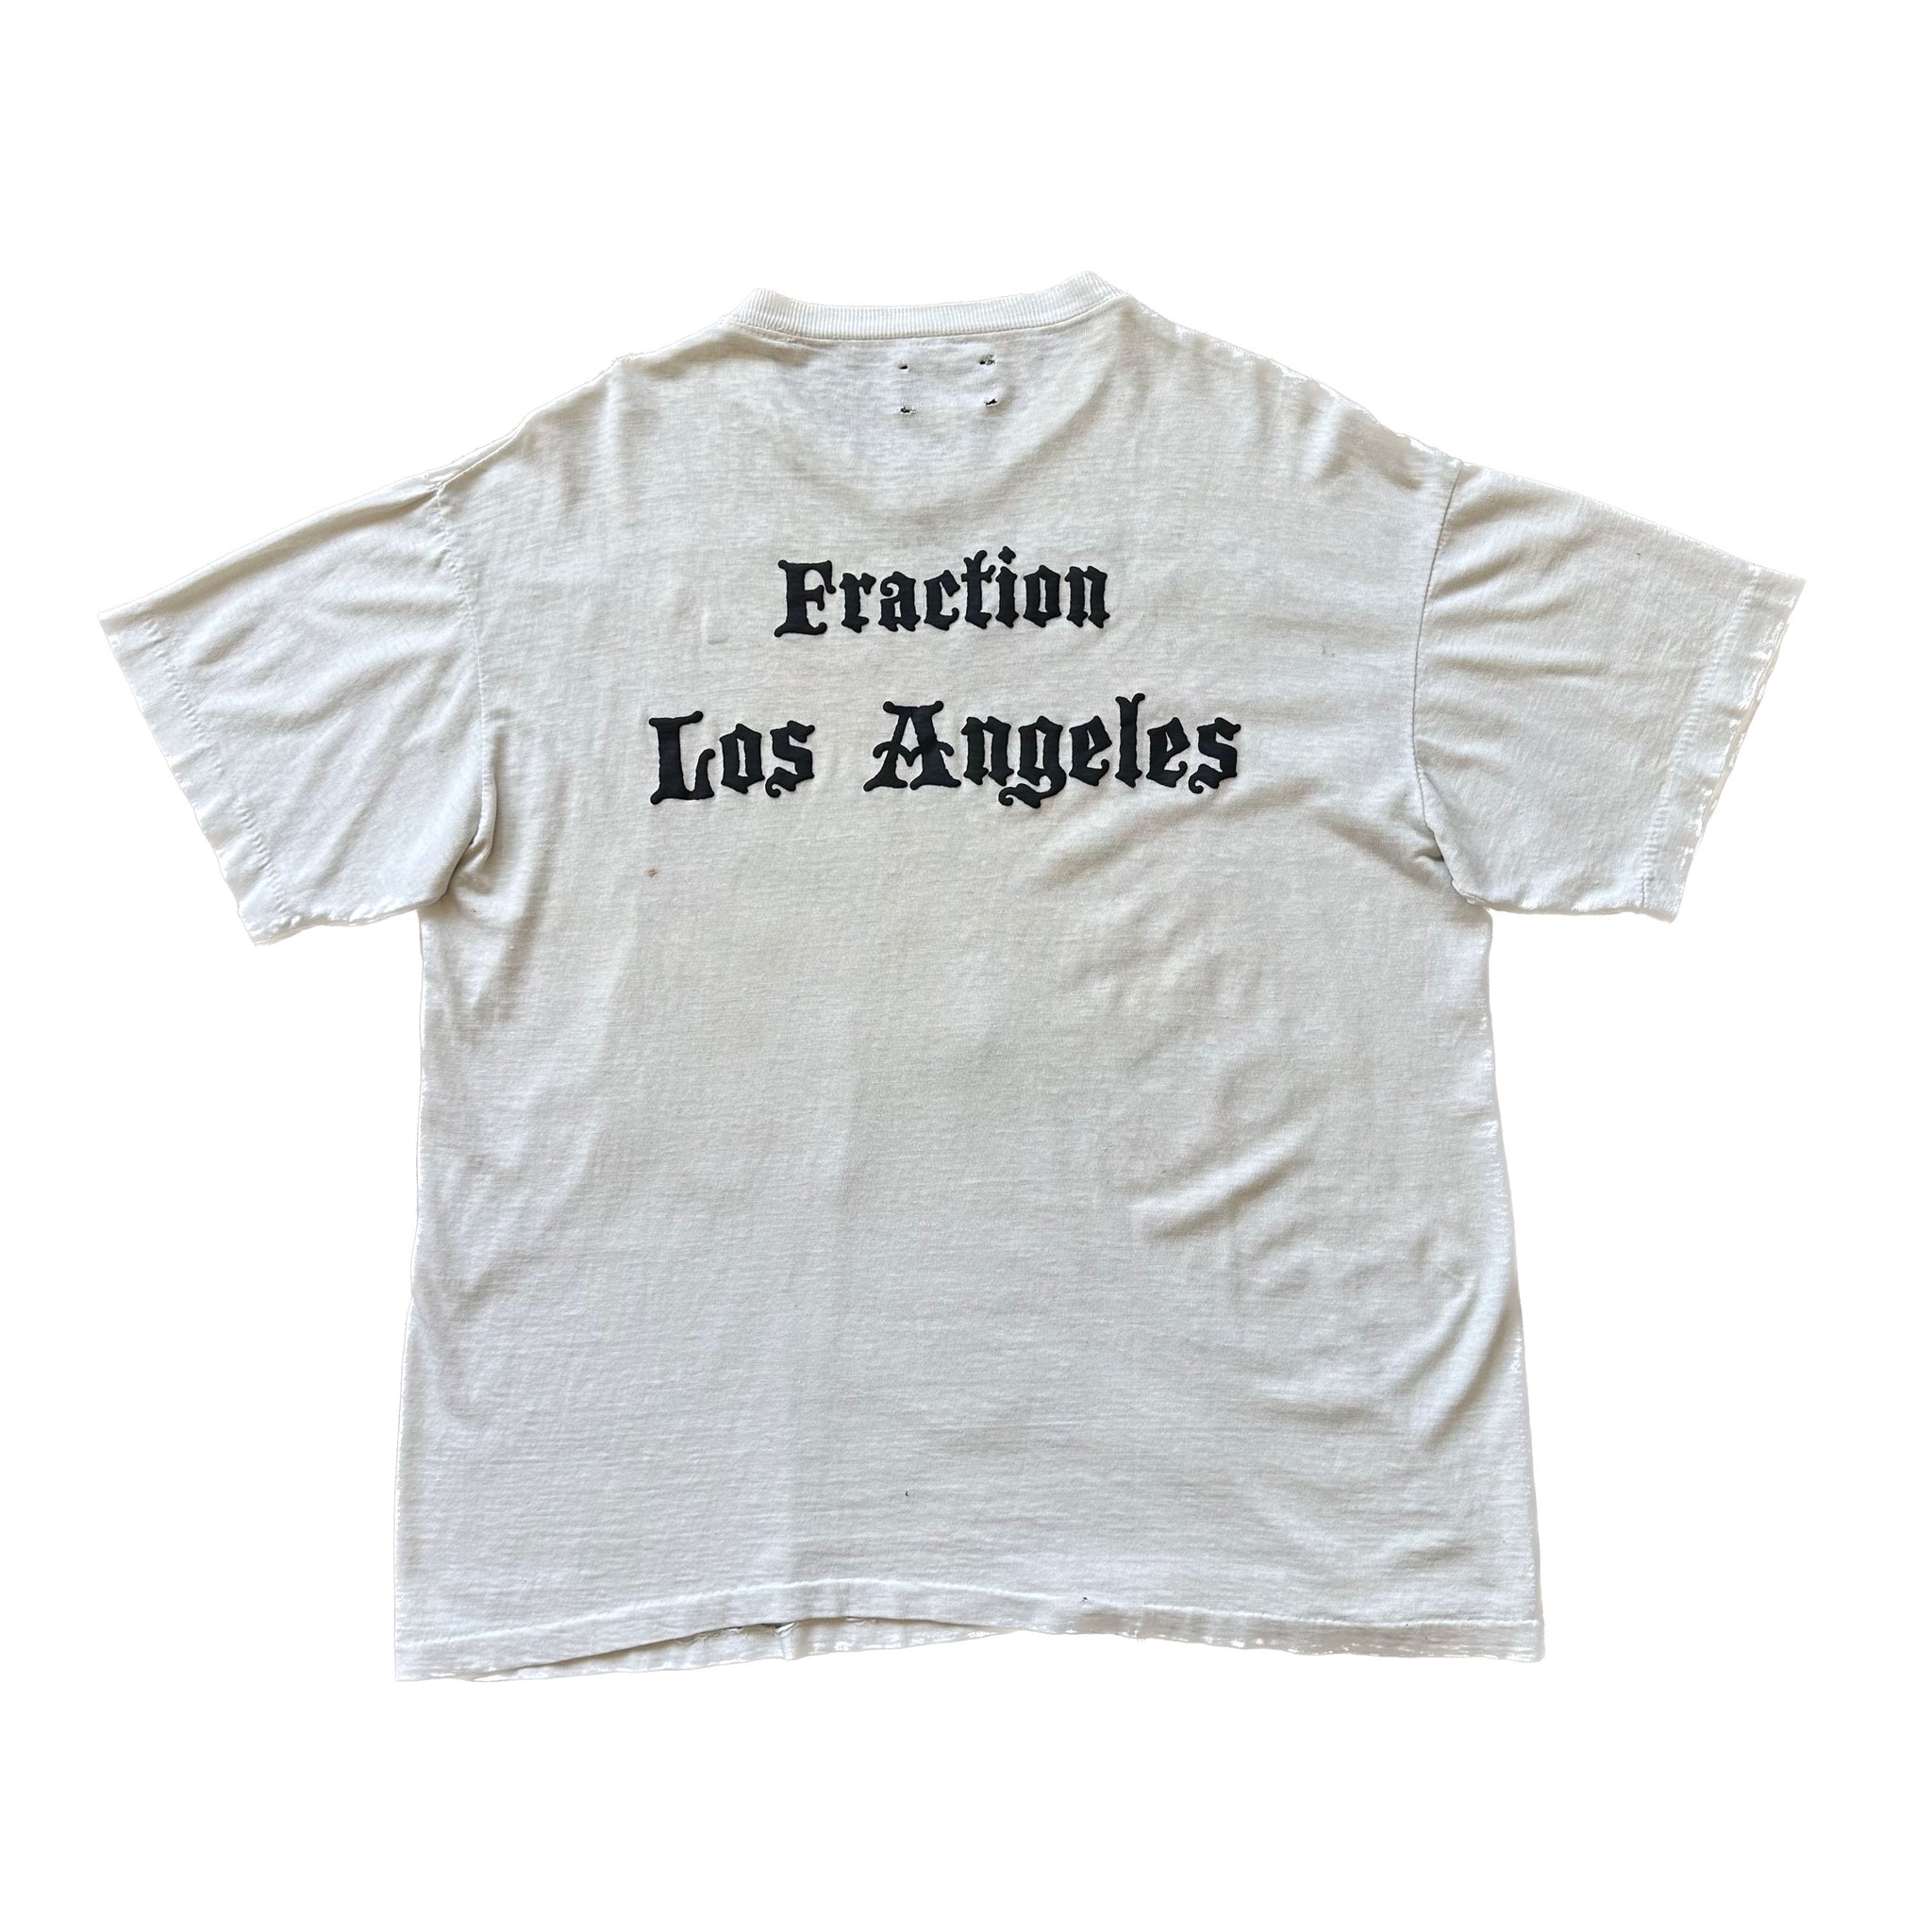 1980s California Kitty Vintage T-shirt with Leather Ribcage Appliqué